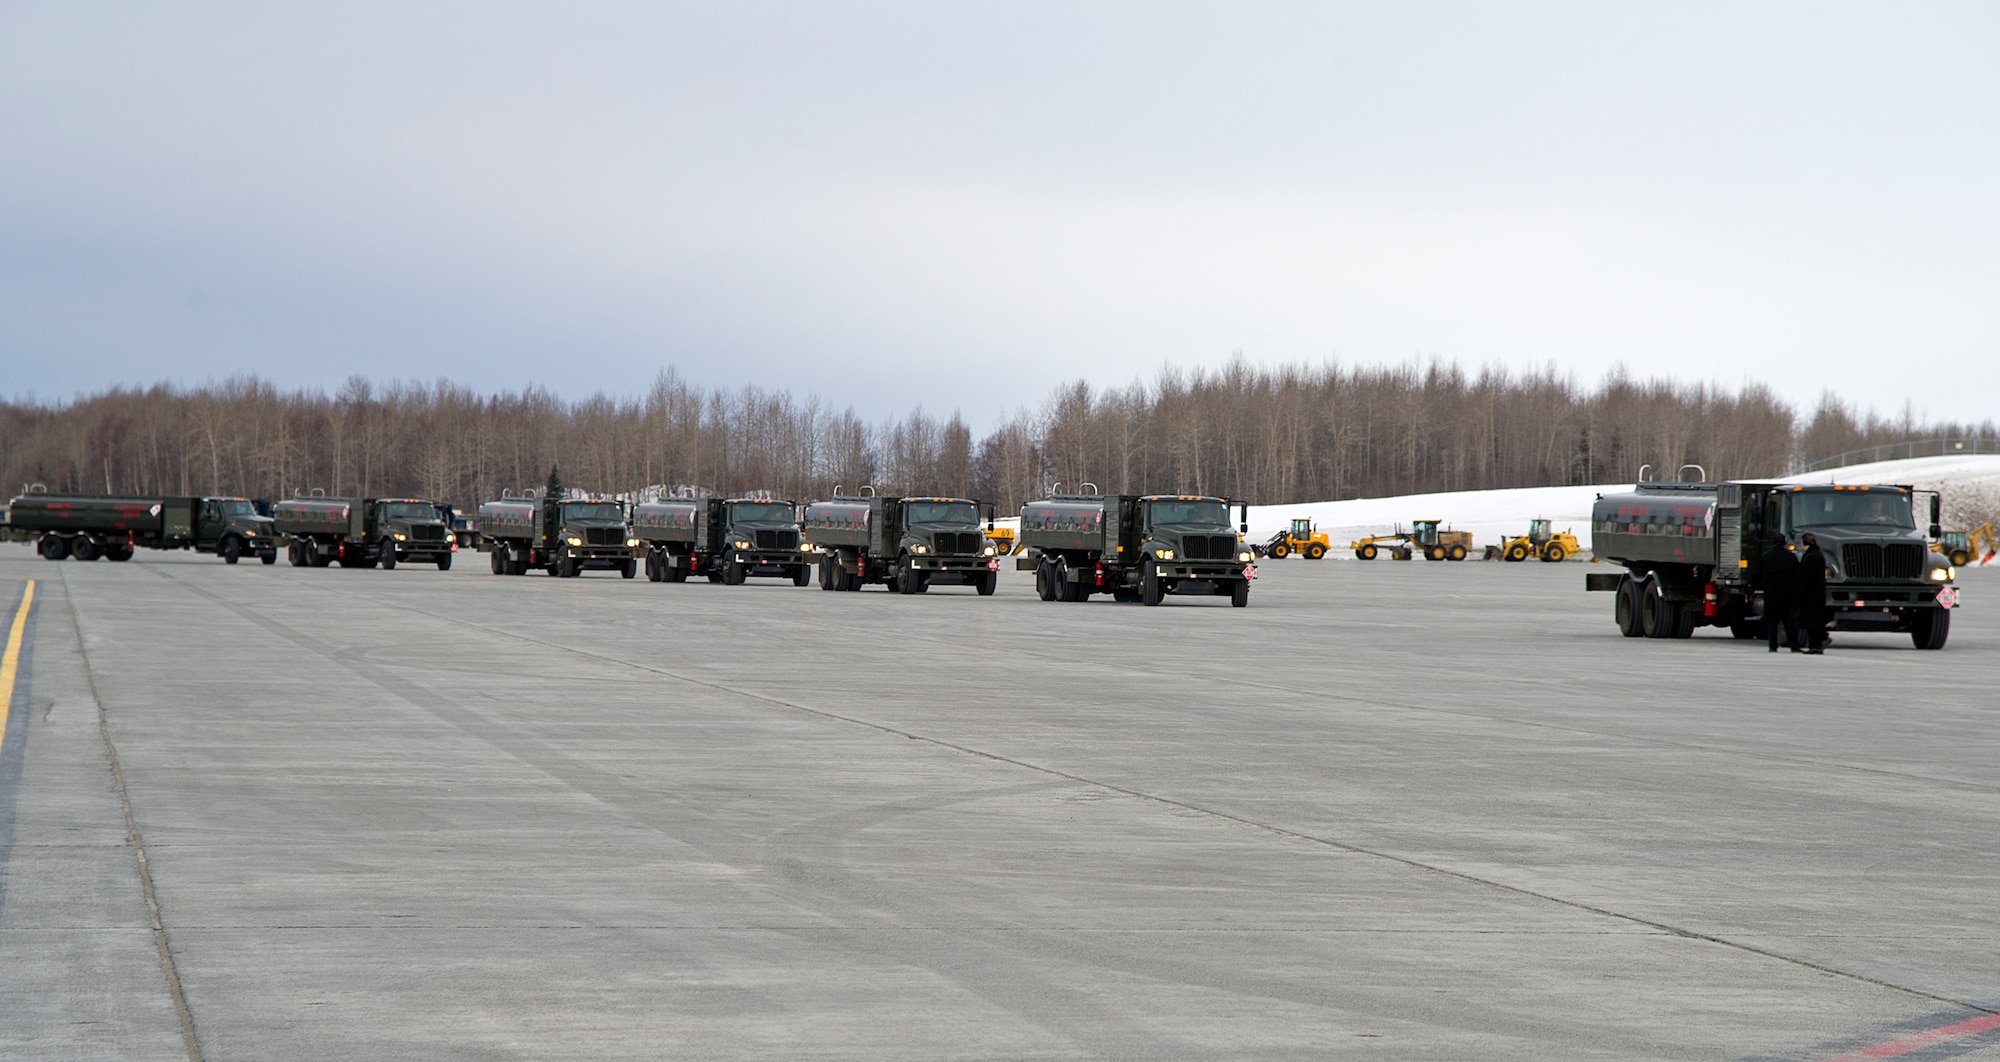 R-11 fuel trucks prepare to deliver to Air Force One on Joint Base Elmendorf-Richardson March 27, 2012. The plane, carrying the President of the United States, landed on JBER to refuel after returning from a visit to the Republic of Korea. (U.S. Air Force photo/Staff Sgt. Zachary Wolf)